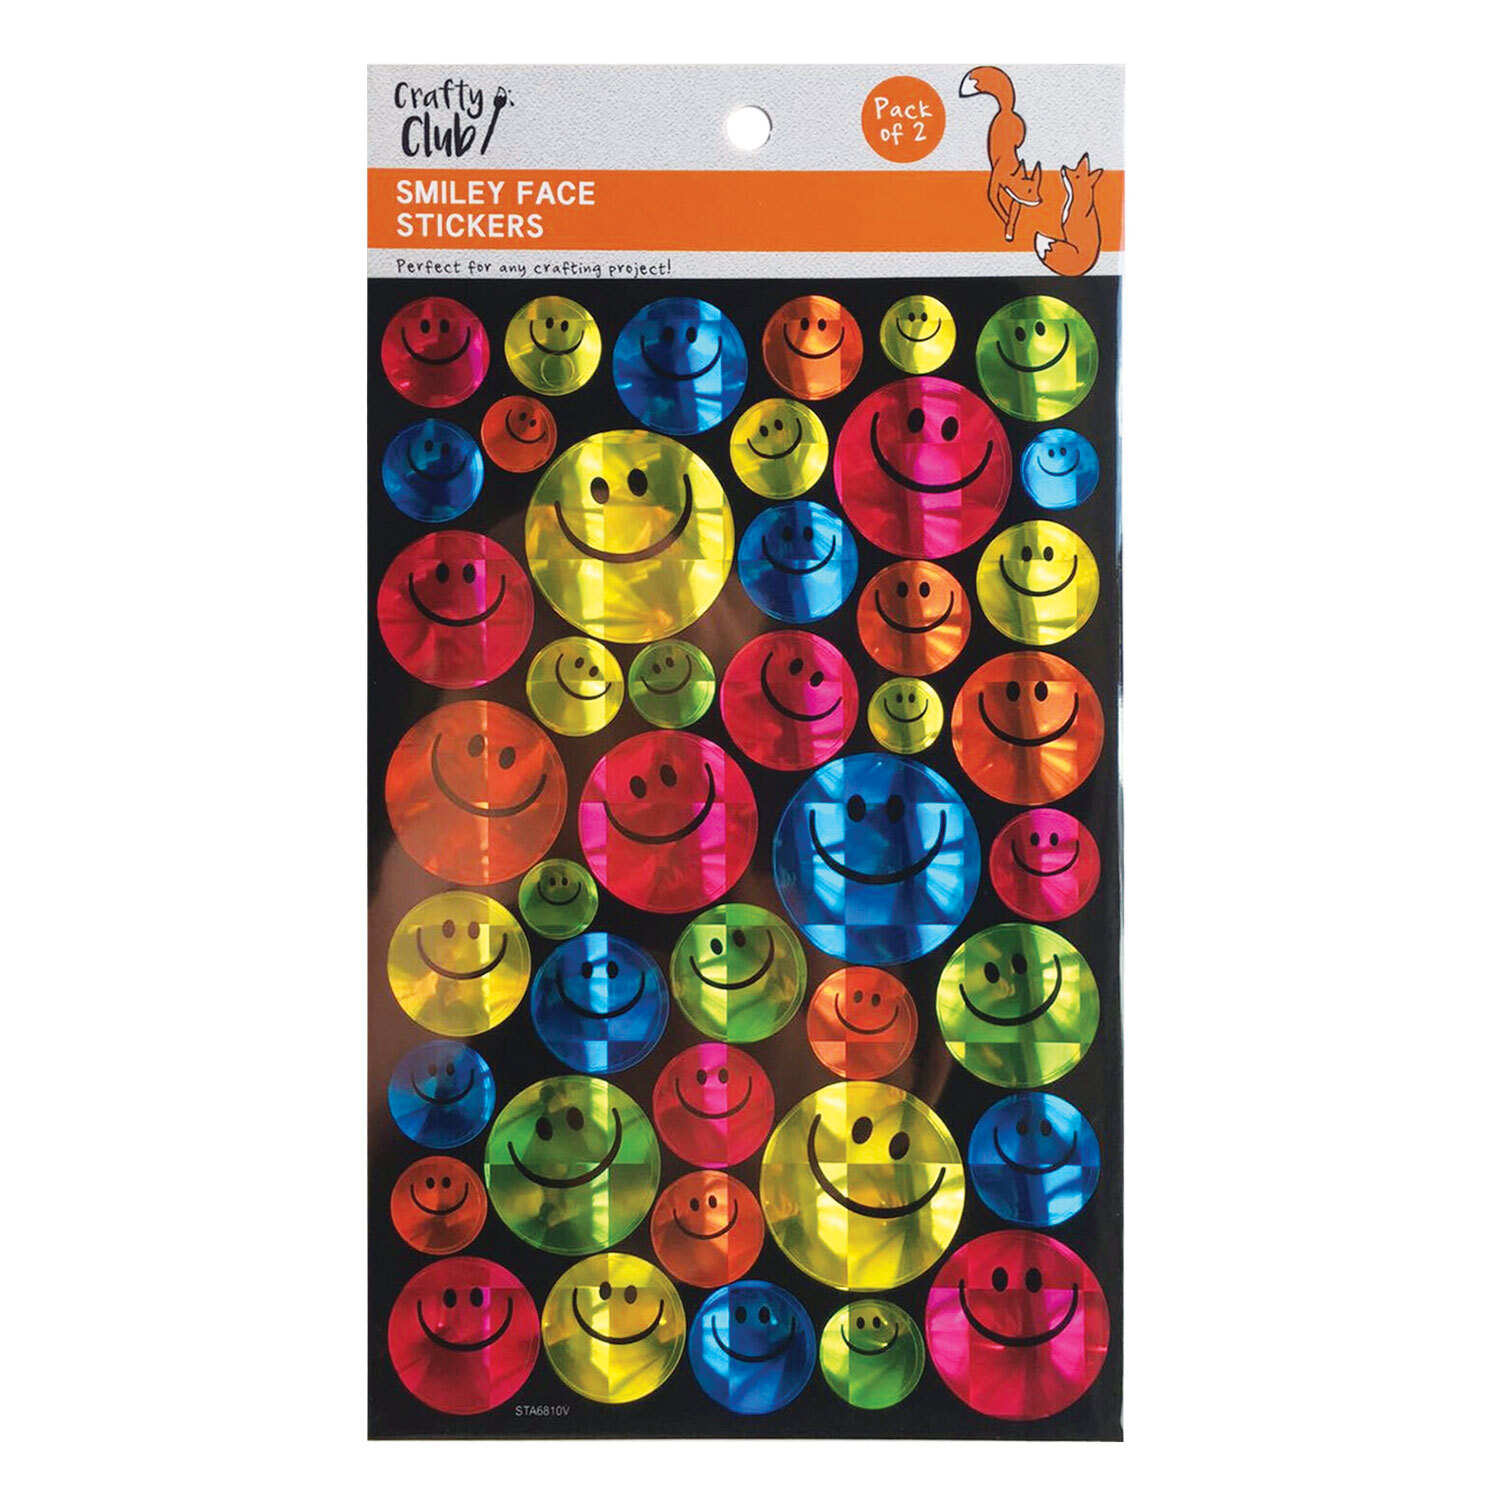 Pack of 2 Smiley Face Sticker Sheets Image